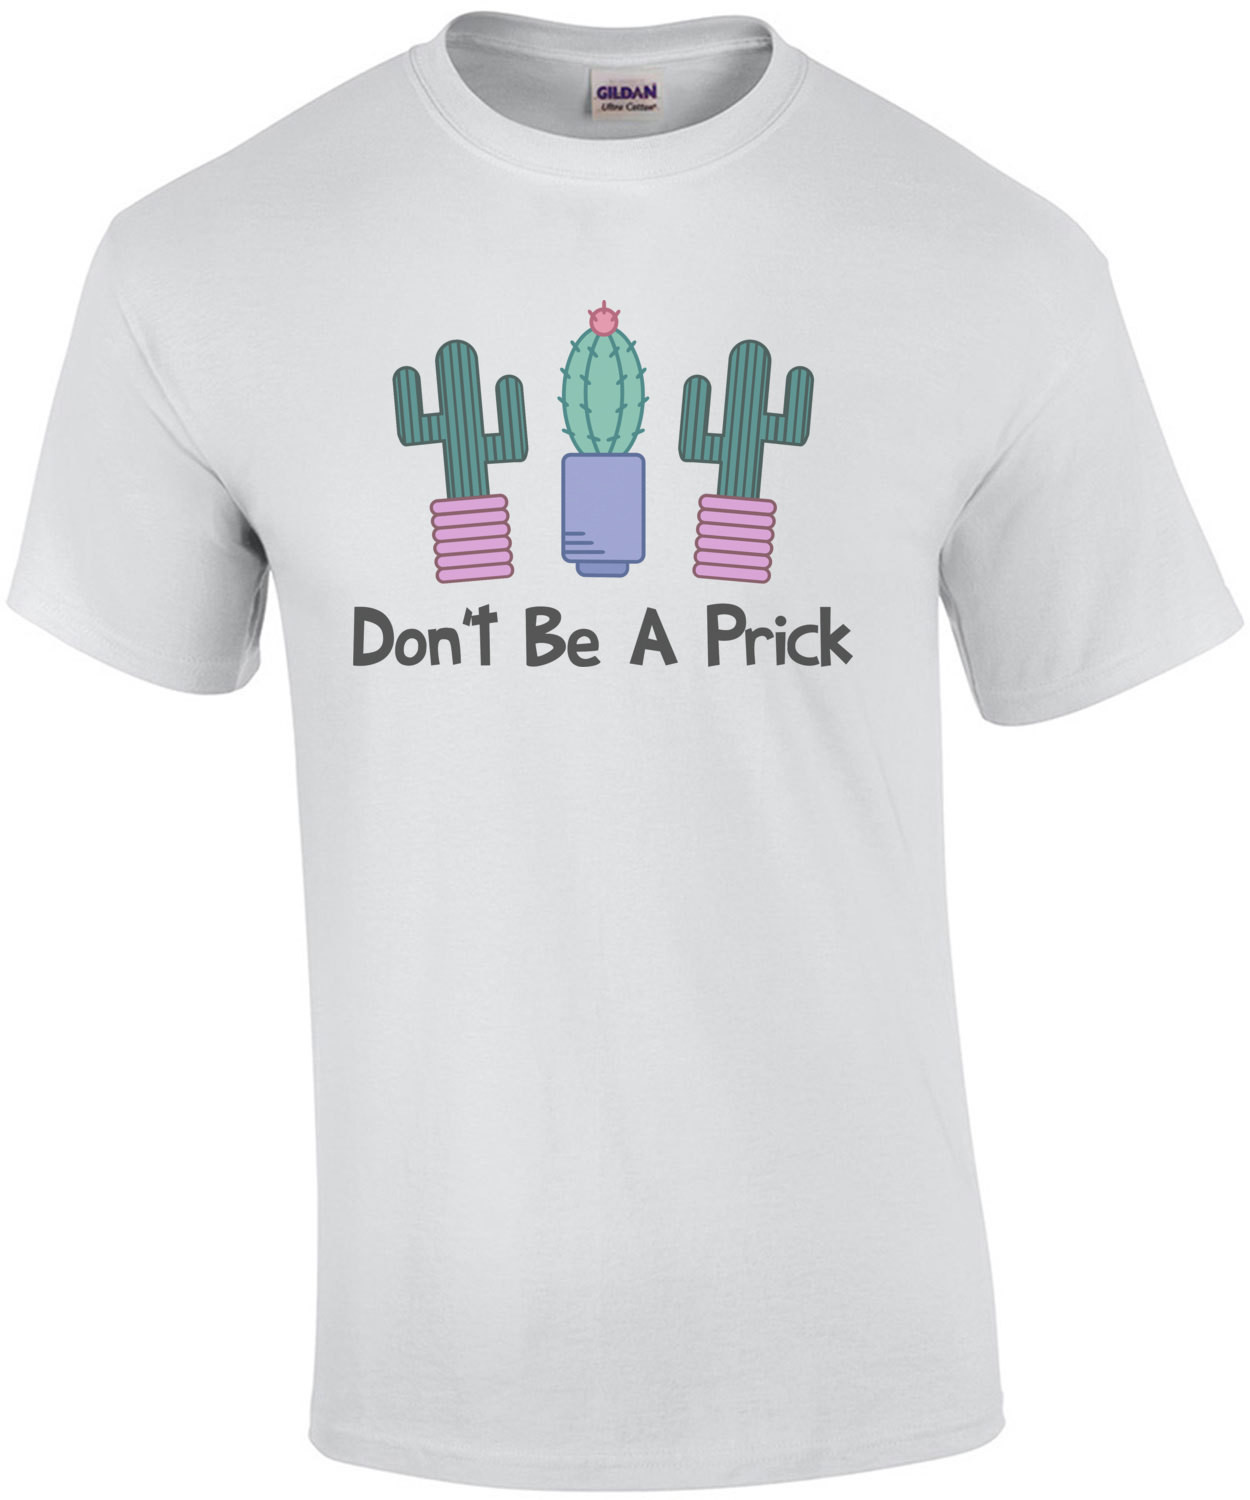 Don't Be A Prick Cute Cactus